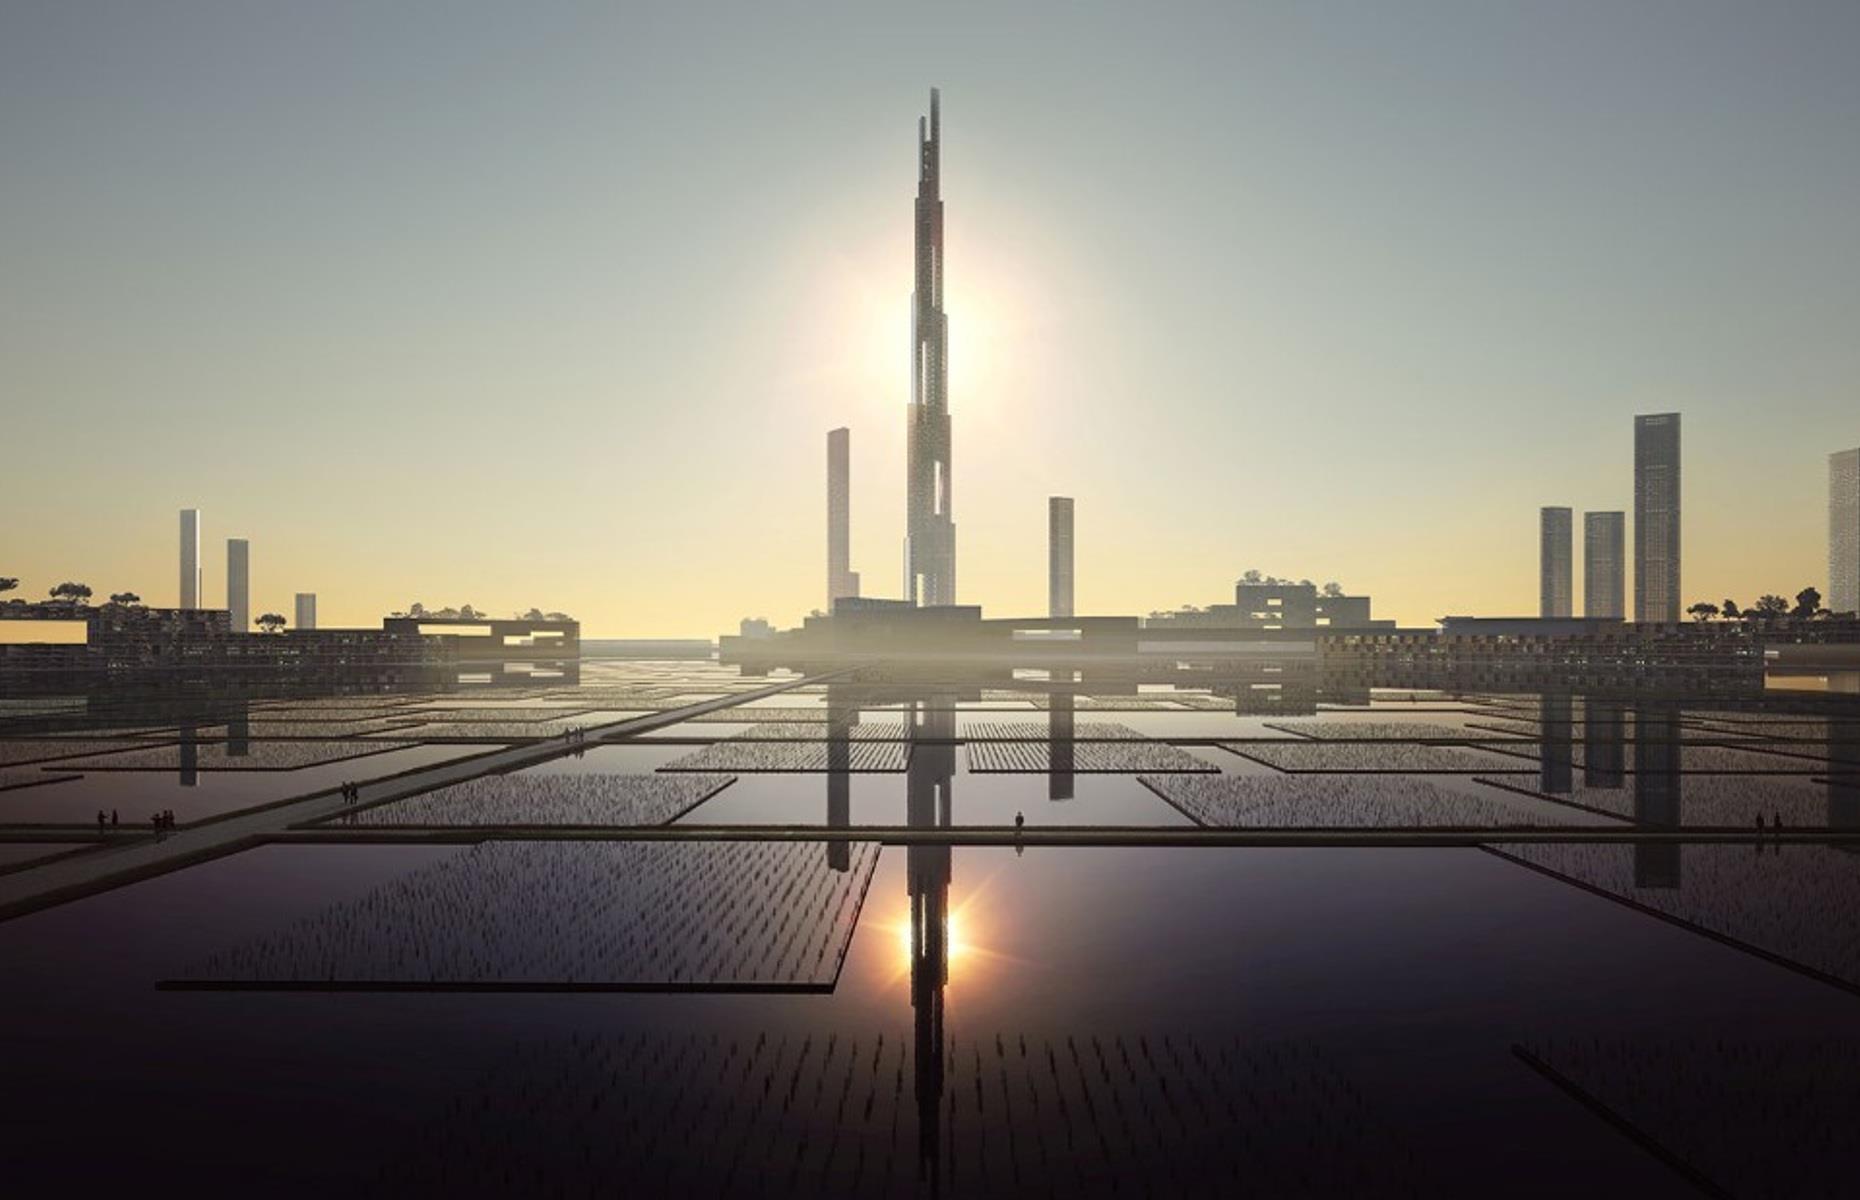 <p>The world's tallest building at present is Dubai's Burj Khalifa, but this mile-high skyscraper, if built, <a href="https://www.architecturaldigest.com/story/tokyo-will-look-like-2045-including-mile-high-skyscraper">would be twice as large</a>. The ambitious design, which comes courtesy of architecture firm Kohn Pedersen Fox and structural engineering firm Leslie E Robertson Associates, won't be setting records anytime soon, however – it's slated for completion in 2045. The building will feature different lobbies for retail, bars, restaurants, gyms and libraries as well as residential space for 55,000 people. It's part of a bigger initiative to build a futuristic city in the Tokyo Bay region.</p>  <p><a href="https://www.loveexploring.com/galleries/133512/the-worlds-most-futuristic-hotels?page=1"><strong>Now check out the world's most futuristic hotels that already exist</strong></a></p>